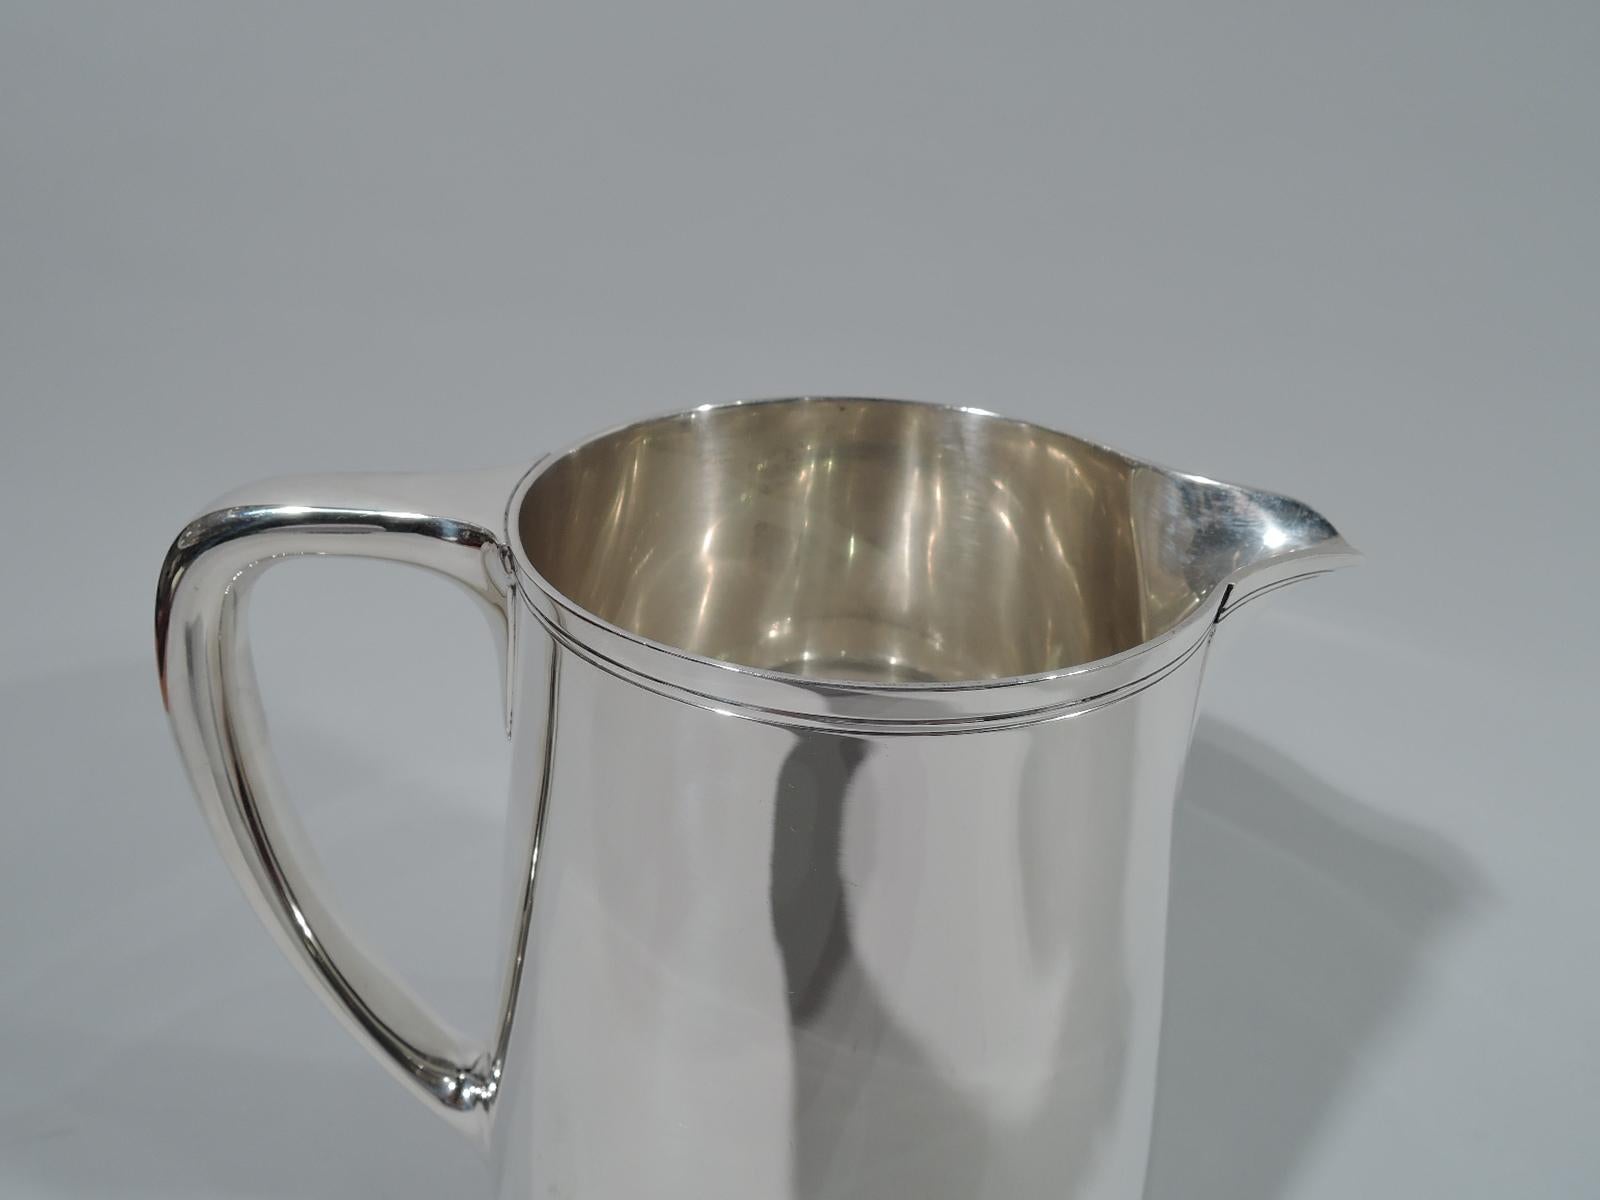 Sterling silver water pitcher. Made by Tiffany & Co. in New York. Upward tapering sides, scrolled bracket handle, and V-spout. Softened Modernism with spare incised banding wrapping around rim and spout. Hallmark includes pattern no. 22343 (first